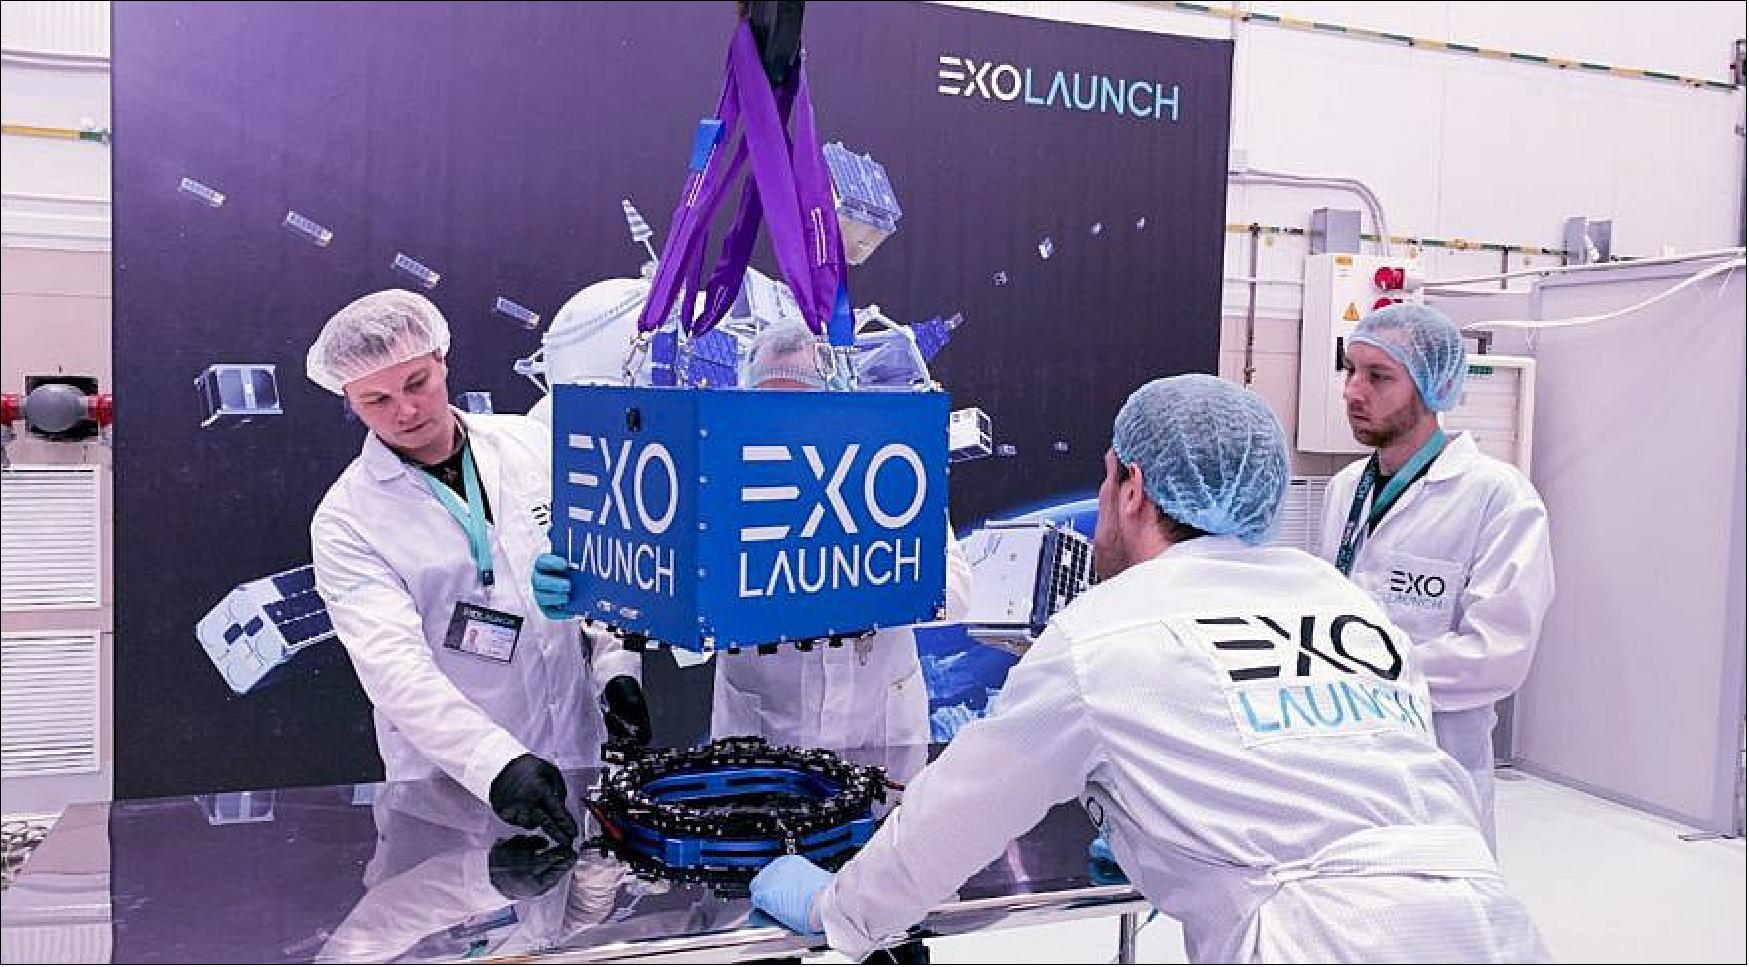 Figure 6: Exolaunch prepares its CarboNIX product, a "shock-free separation system" for small satellites with a mass of 10-350 kg (image credit: Exolaunch)